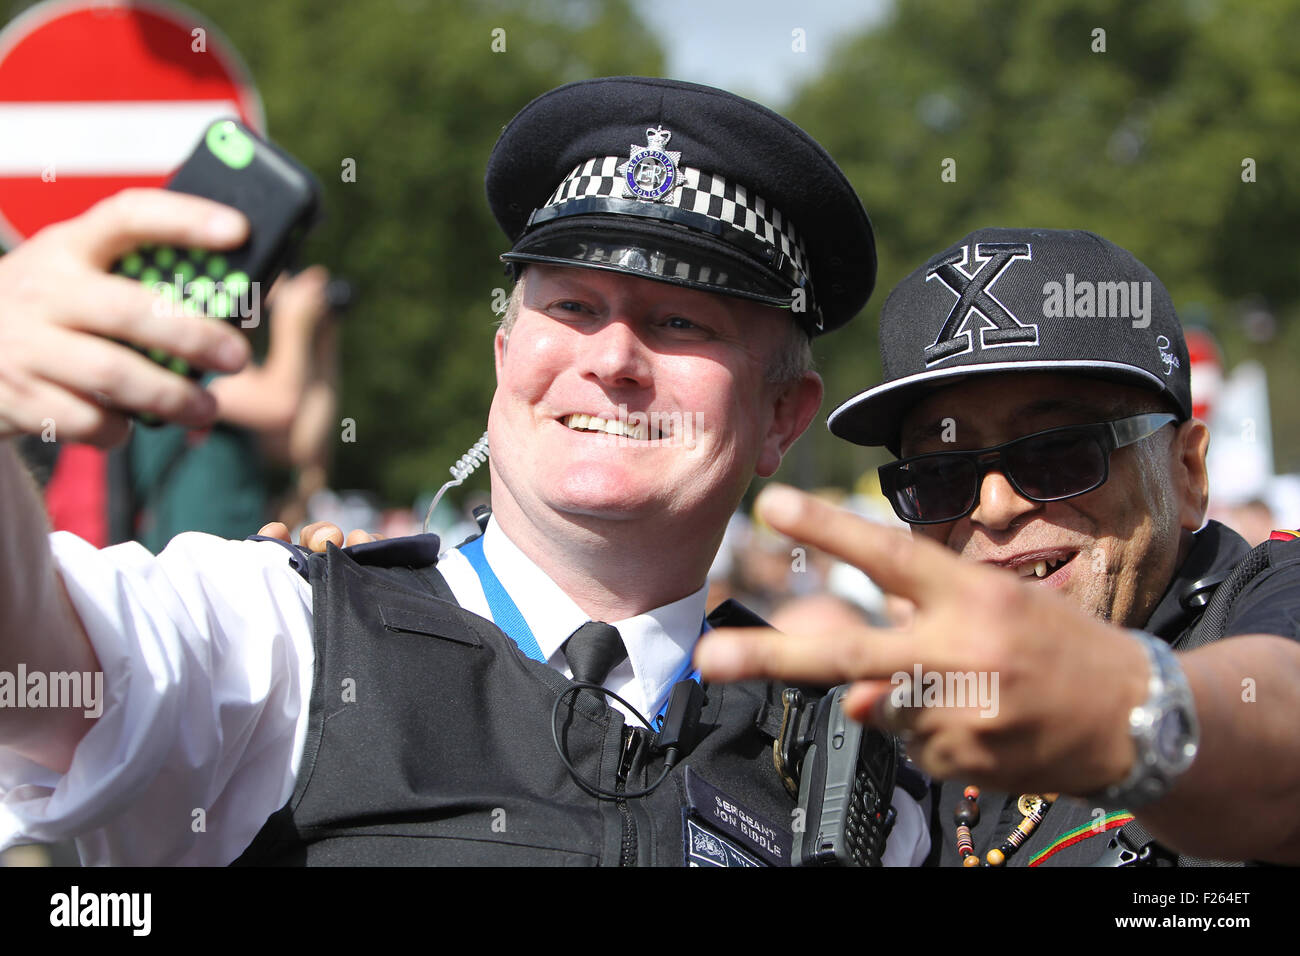 London, UK. 12th Sep, 2015. A police officer has his photo taken with a protestor during the Solidarity with Refugees march in central London. Credit:  Randi Sokoloff/Alamy Live News Stock Photo